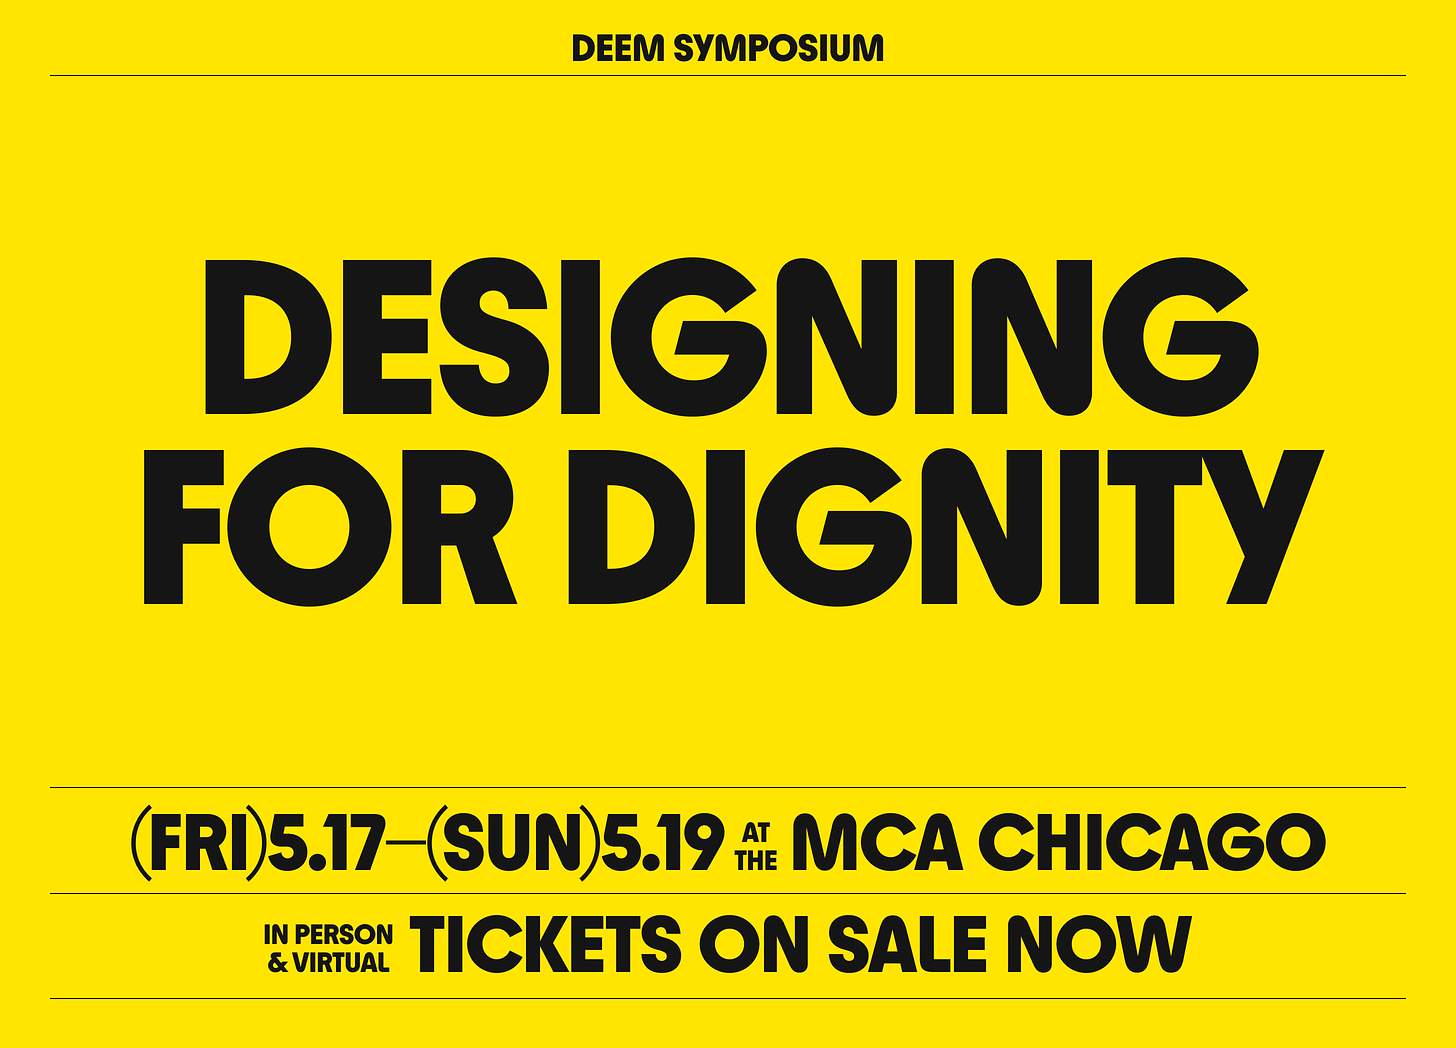 Black text on yellow background that reads: Deem Symposium Designing for Dignity, Friday May 17 to Sunday May 19 at the MCA Chicago, in person and virtual tickets on sale now.